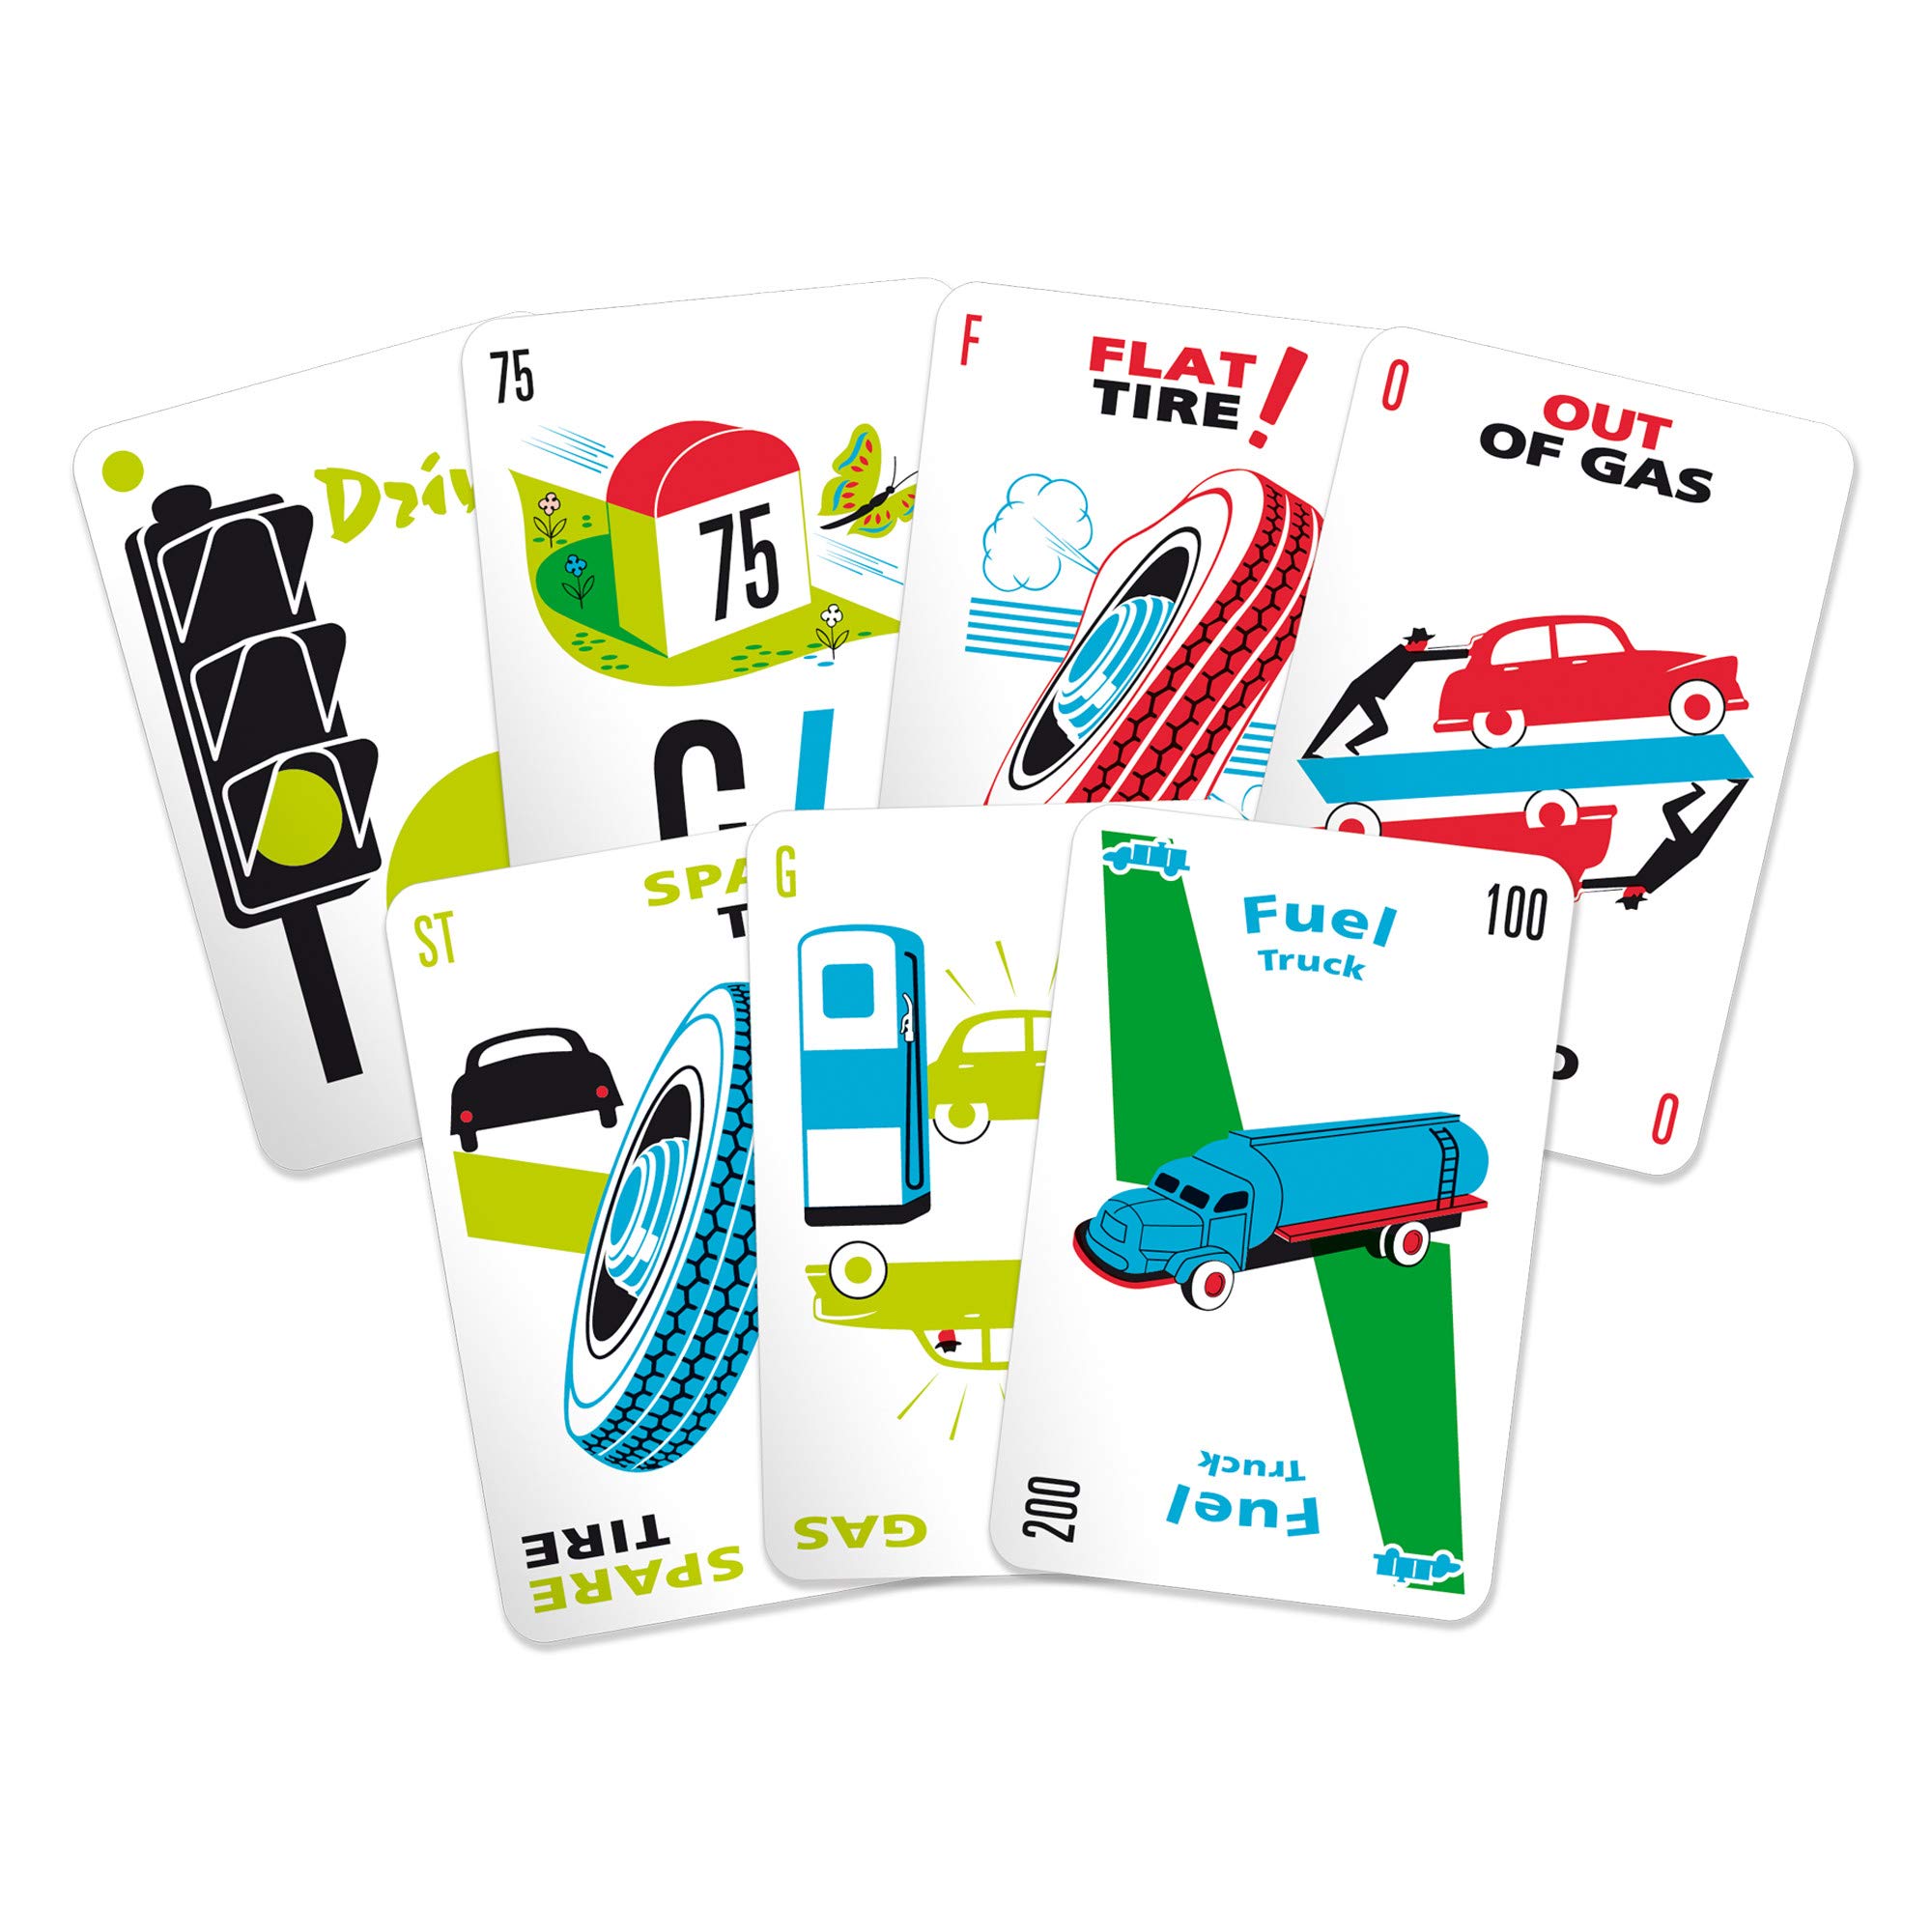 Mille Bornes The Classic Racing Game | Fast-Paced Card | Strategy | Fun Family Game for Adults and Kids | Ages 7 and Up | 2-6 Players | Average Playtime 20 Minutes | Made by Zygomatic